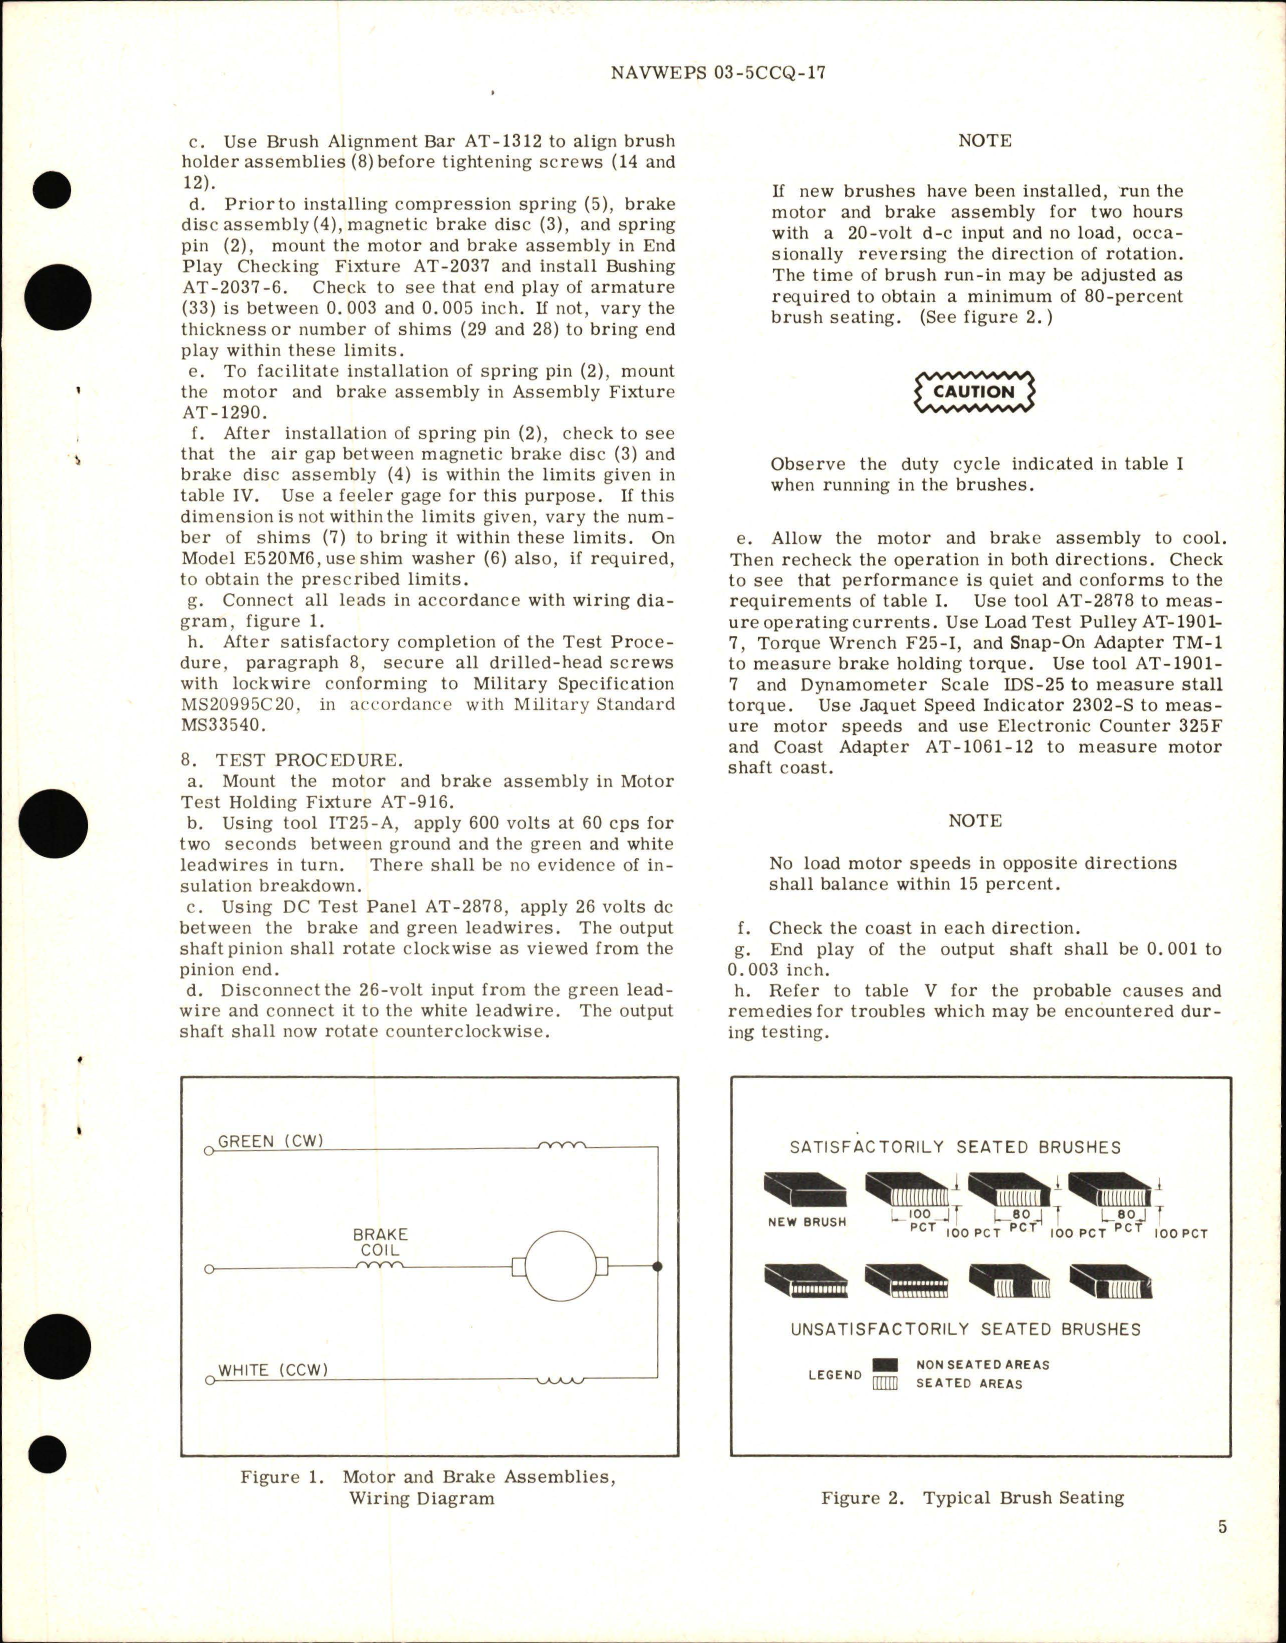 Sample page 5 from AirCorps Library document: Overhaul Instructions with Parts Breakdown for Motor and Brake Assemblies - Model E520M6 and E52M6-2